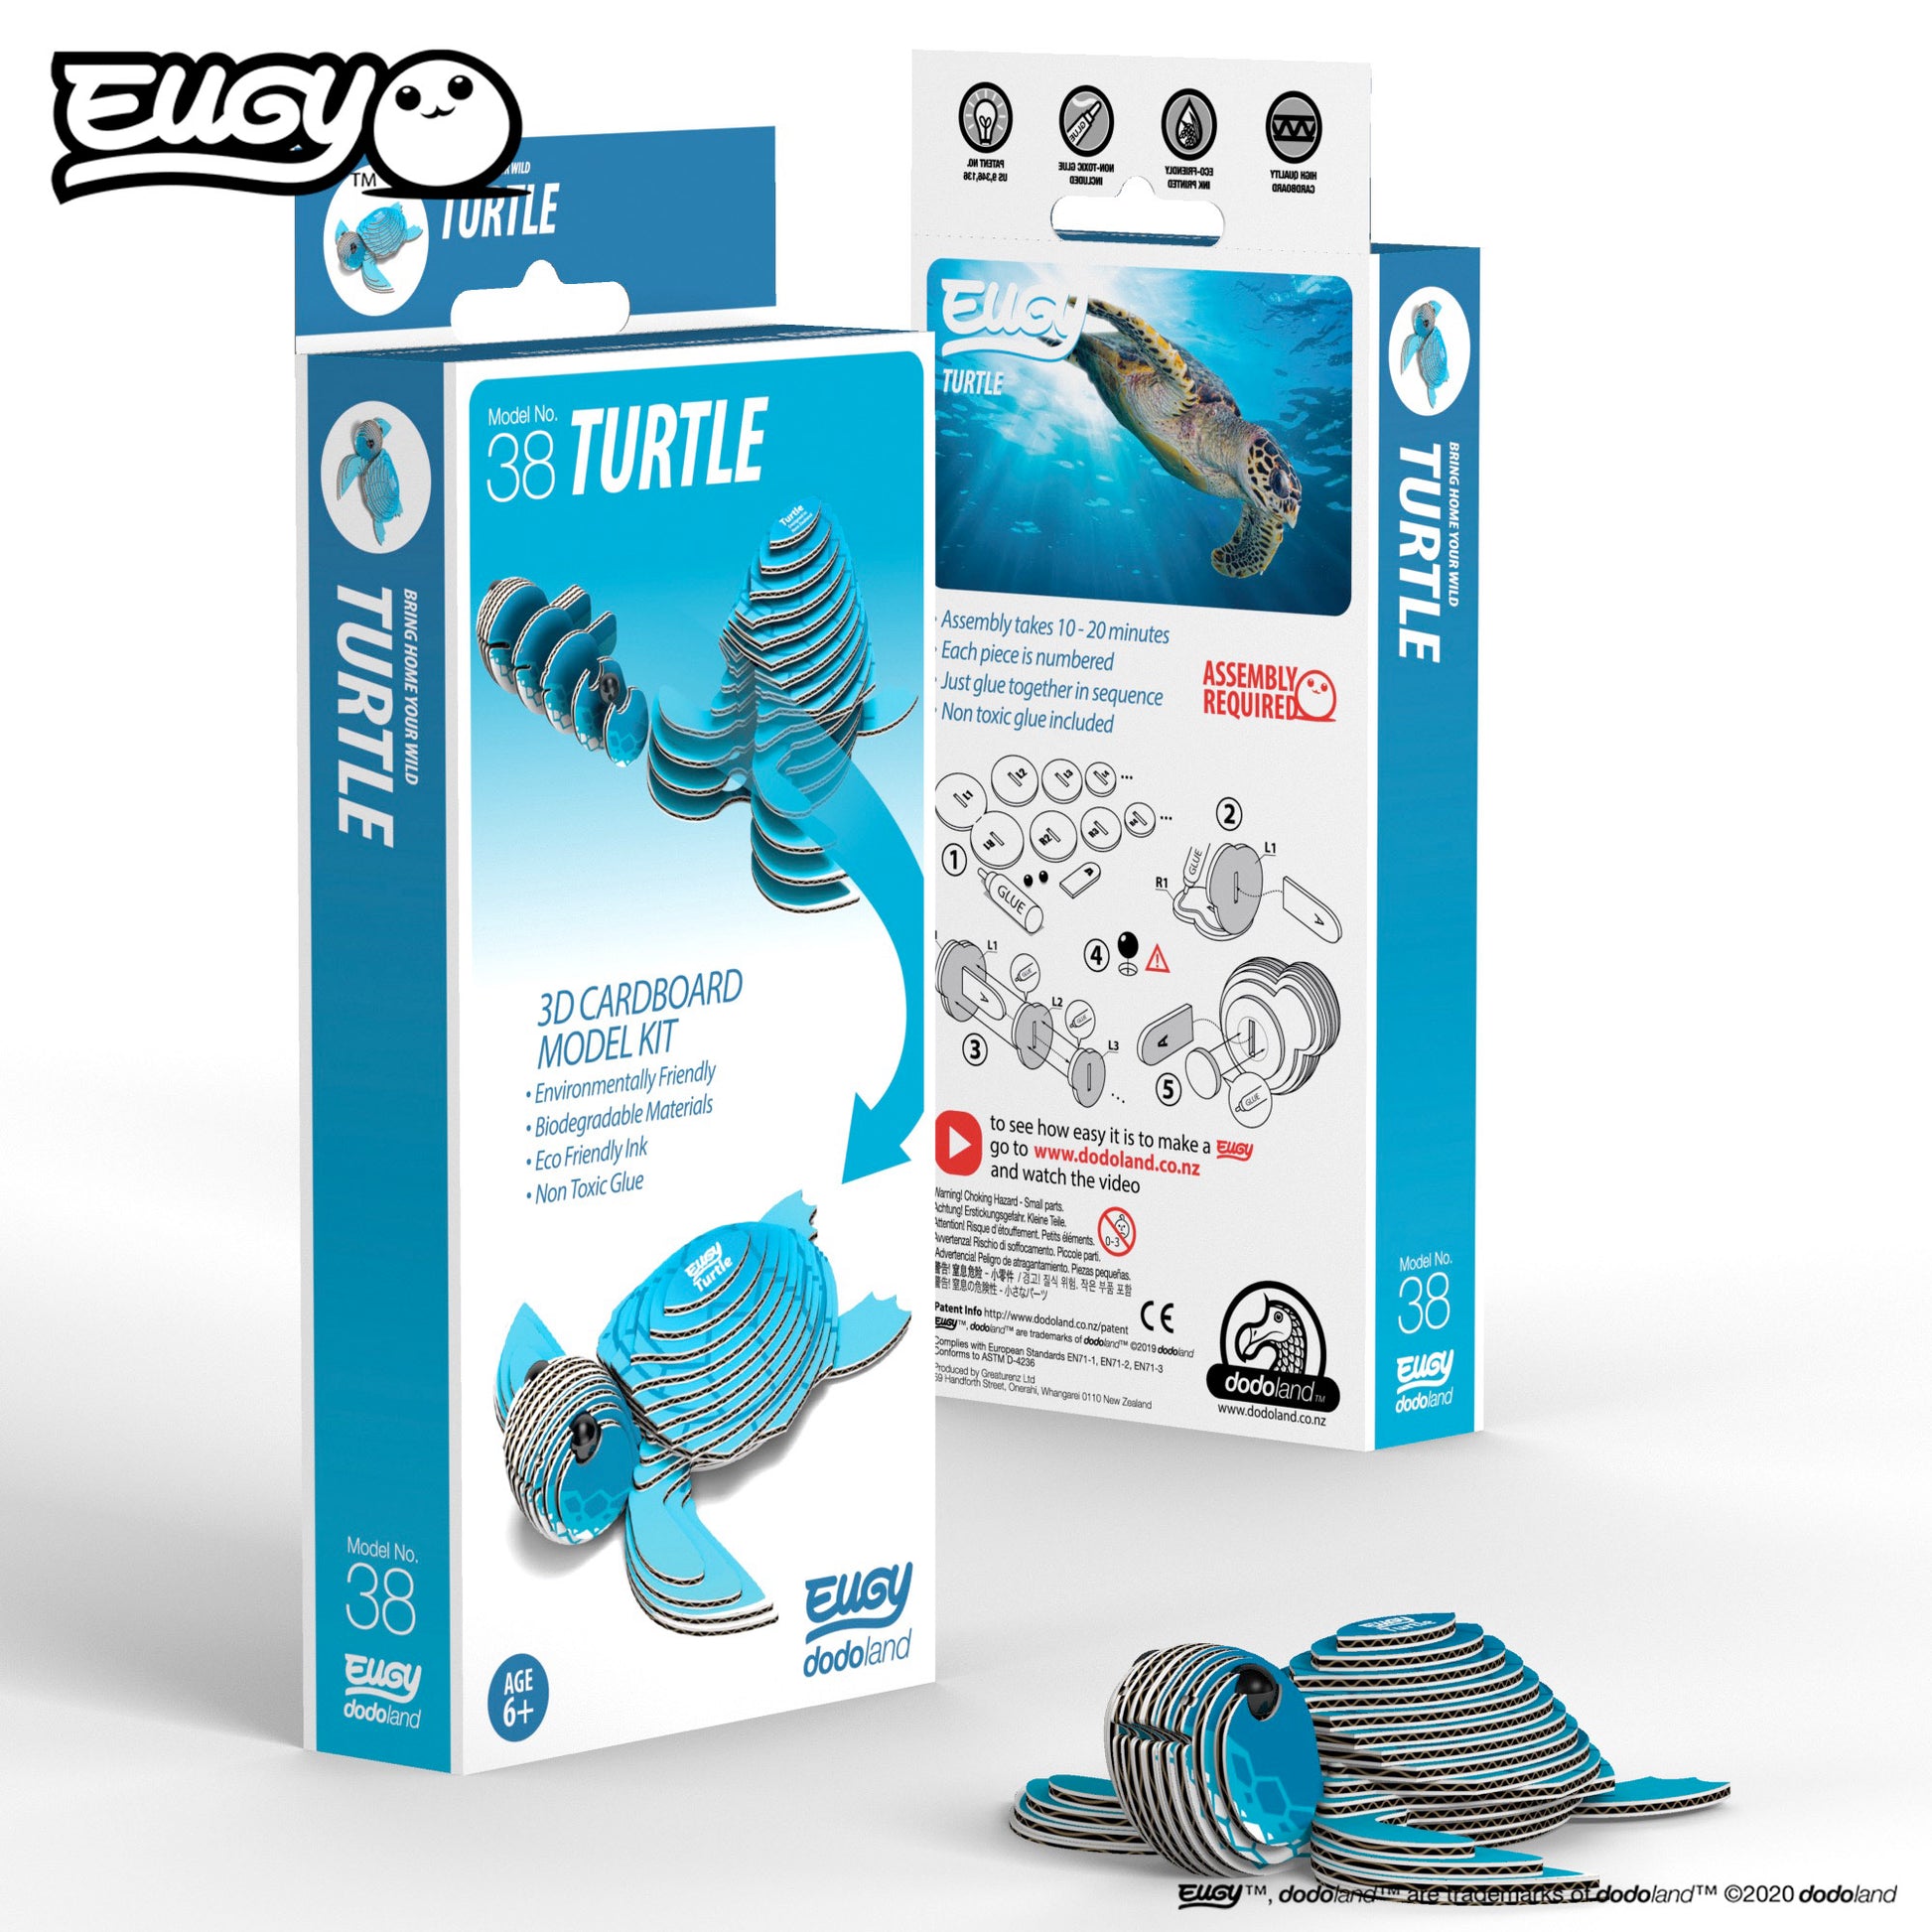 Dive into Serenity with a Sea Turtle 3D Puzzle by Eugy - 3D Turtle ( 038 )